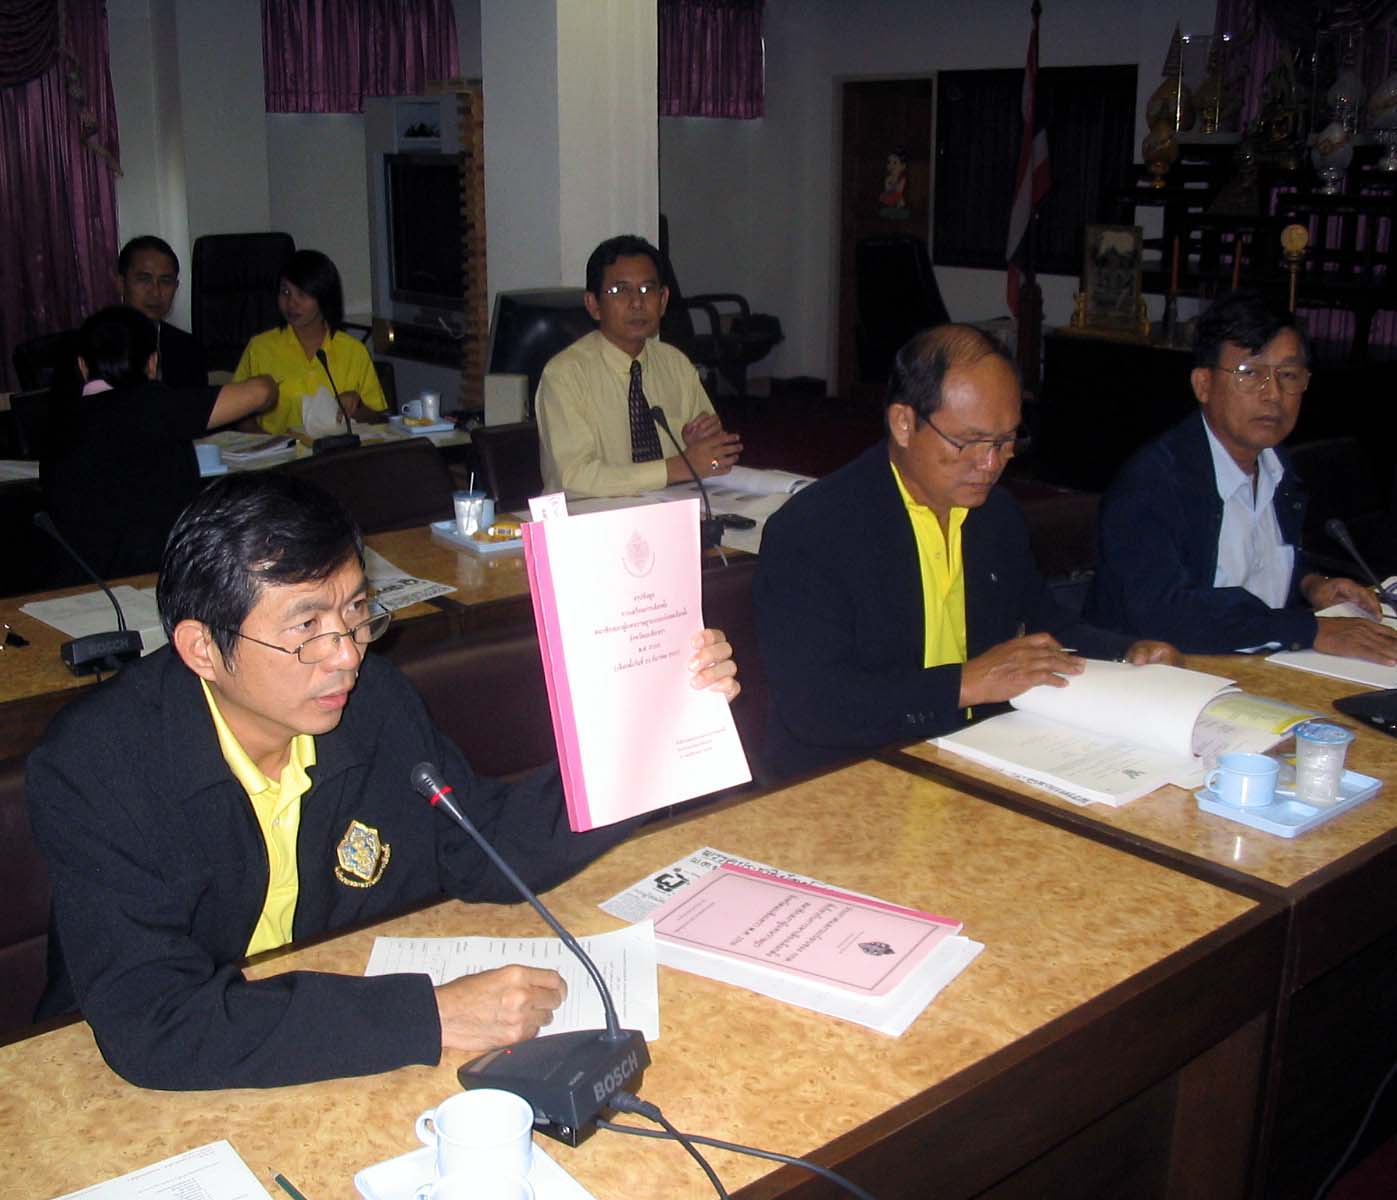 Michael H. Nelson, Chachoengsao Election Campaign, Thailand 2007